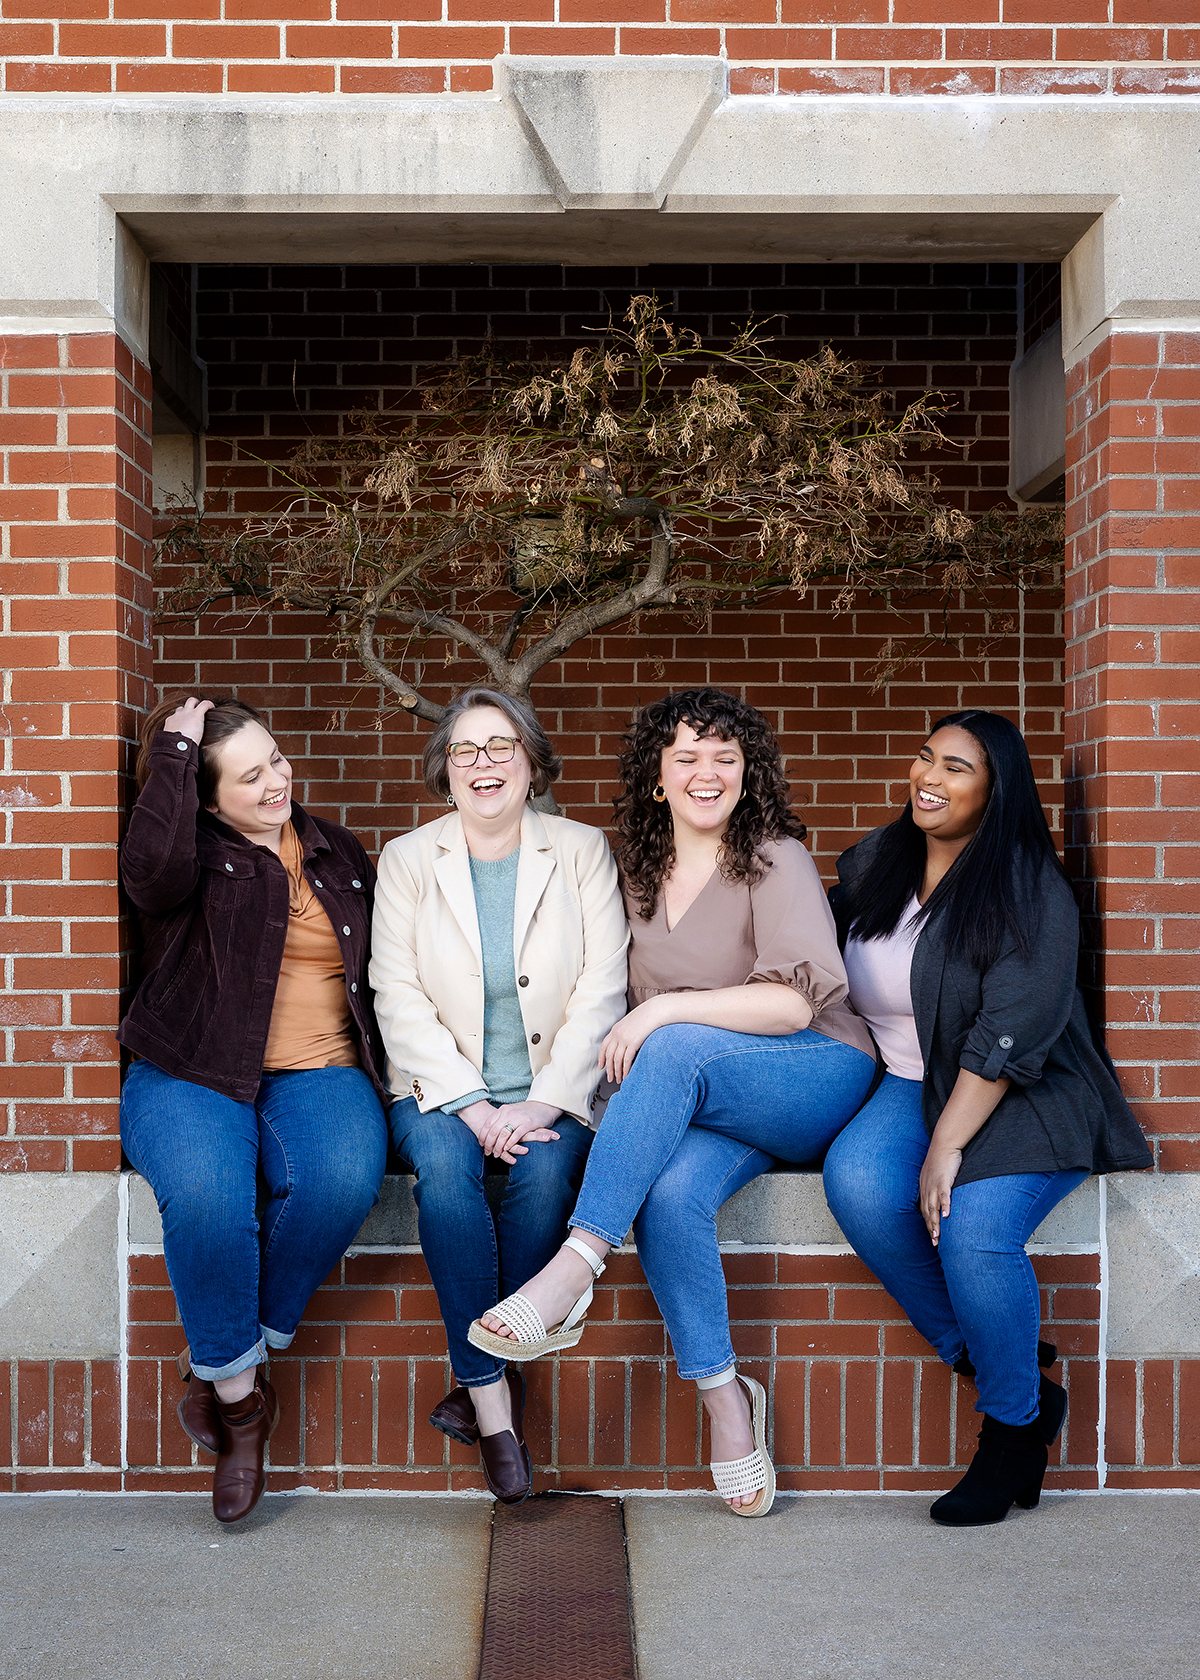 The Better Together Mental Health team sits and laughs spending time together during their photoshoot. 